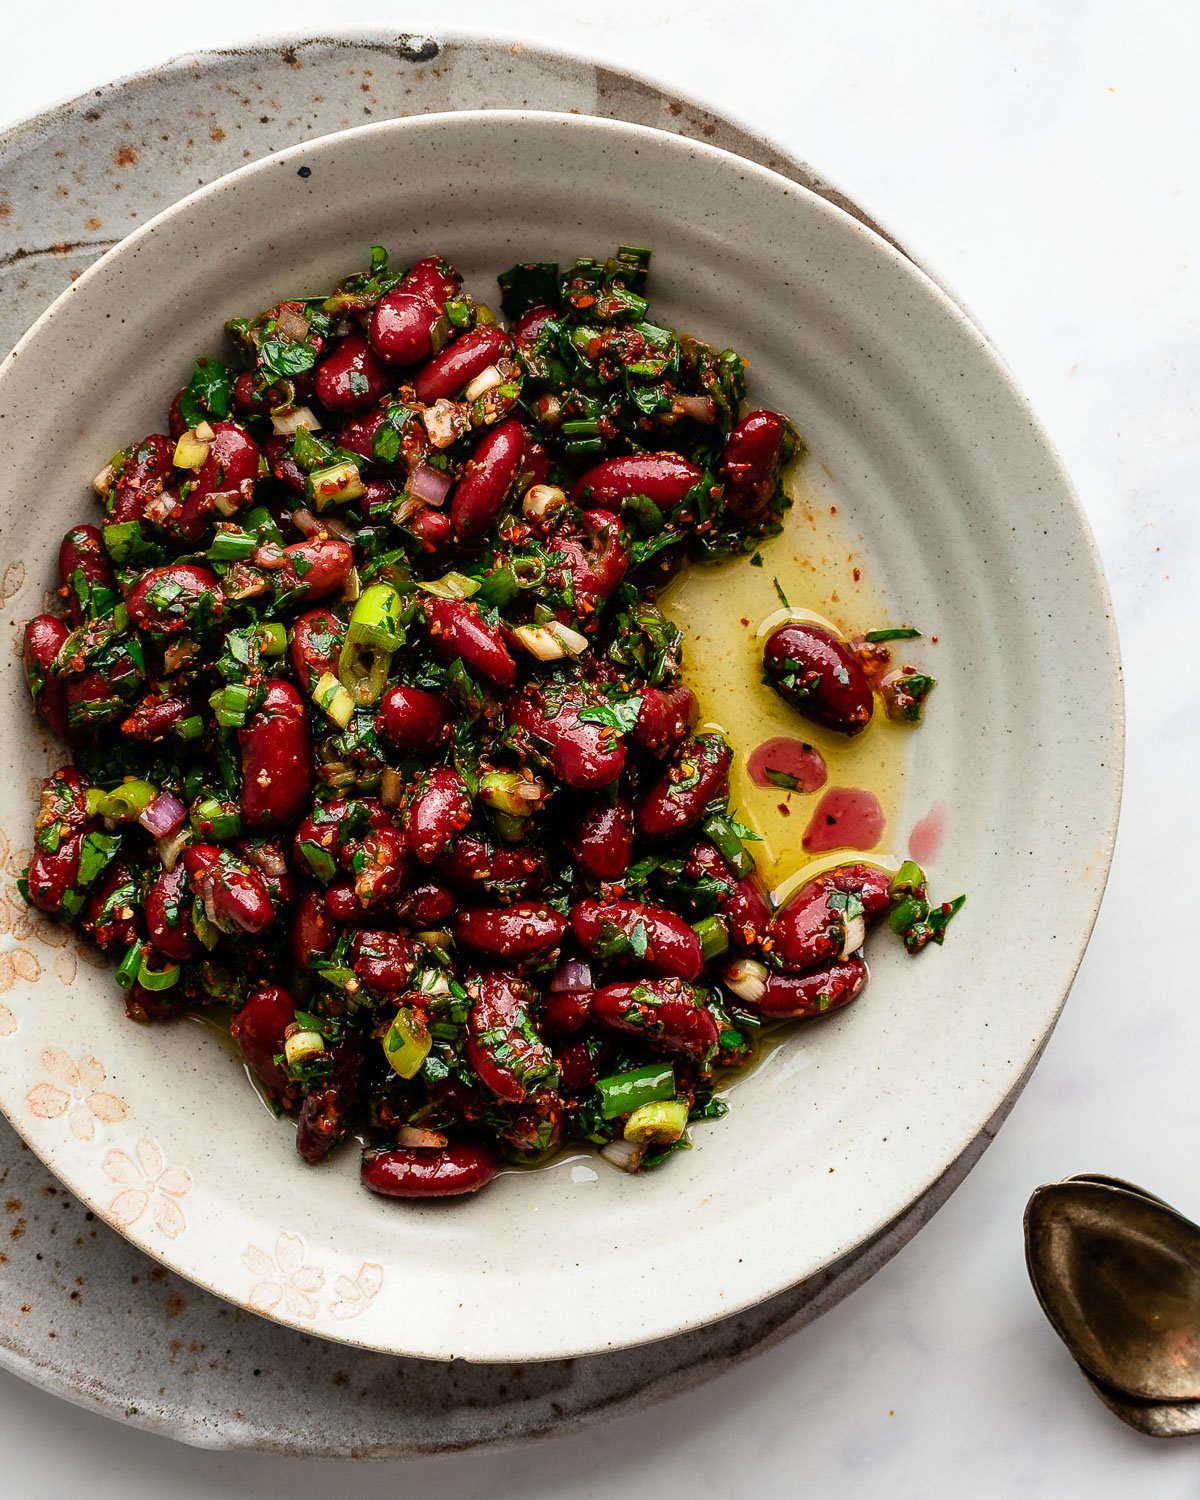 Marinated Red Kidney Beans